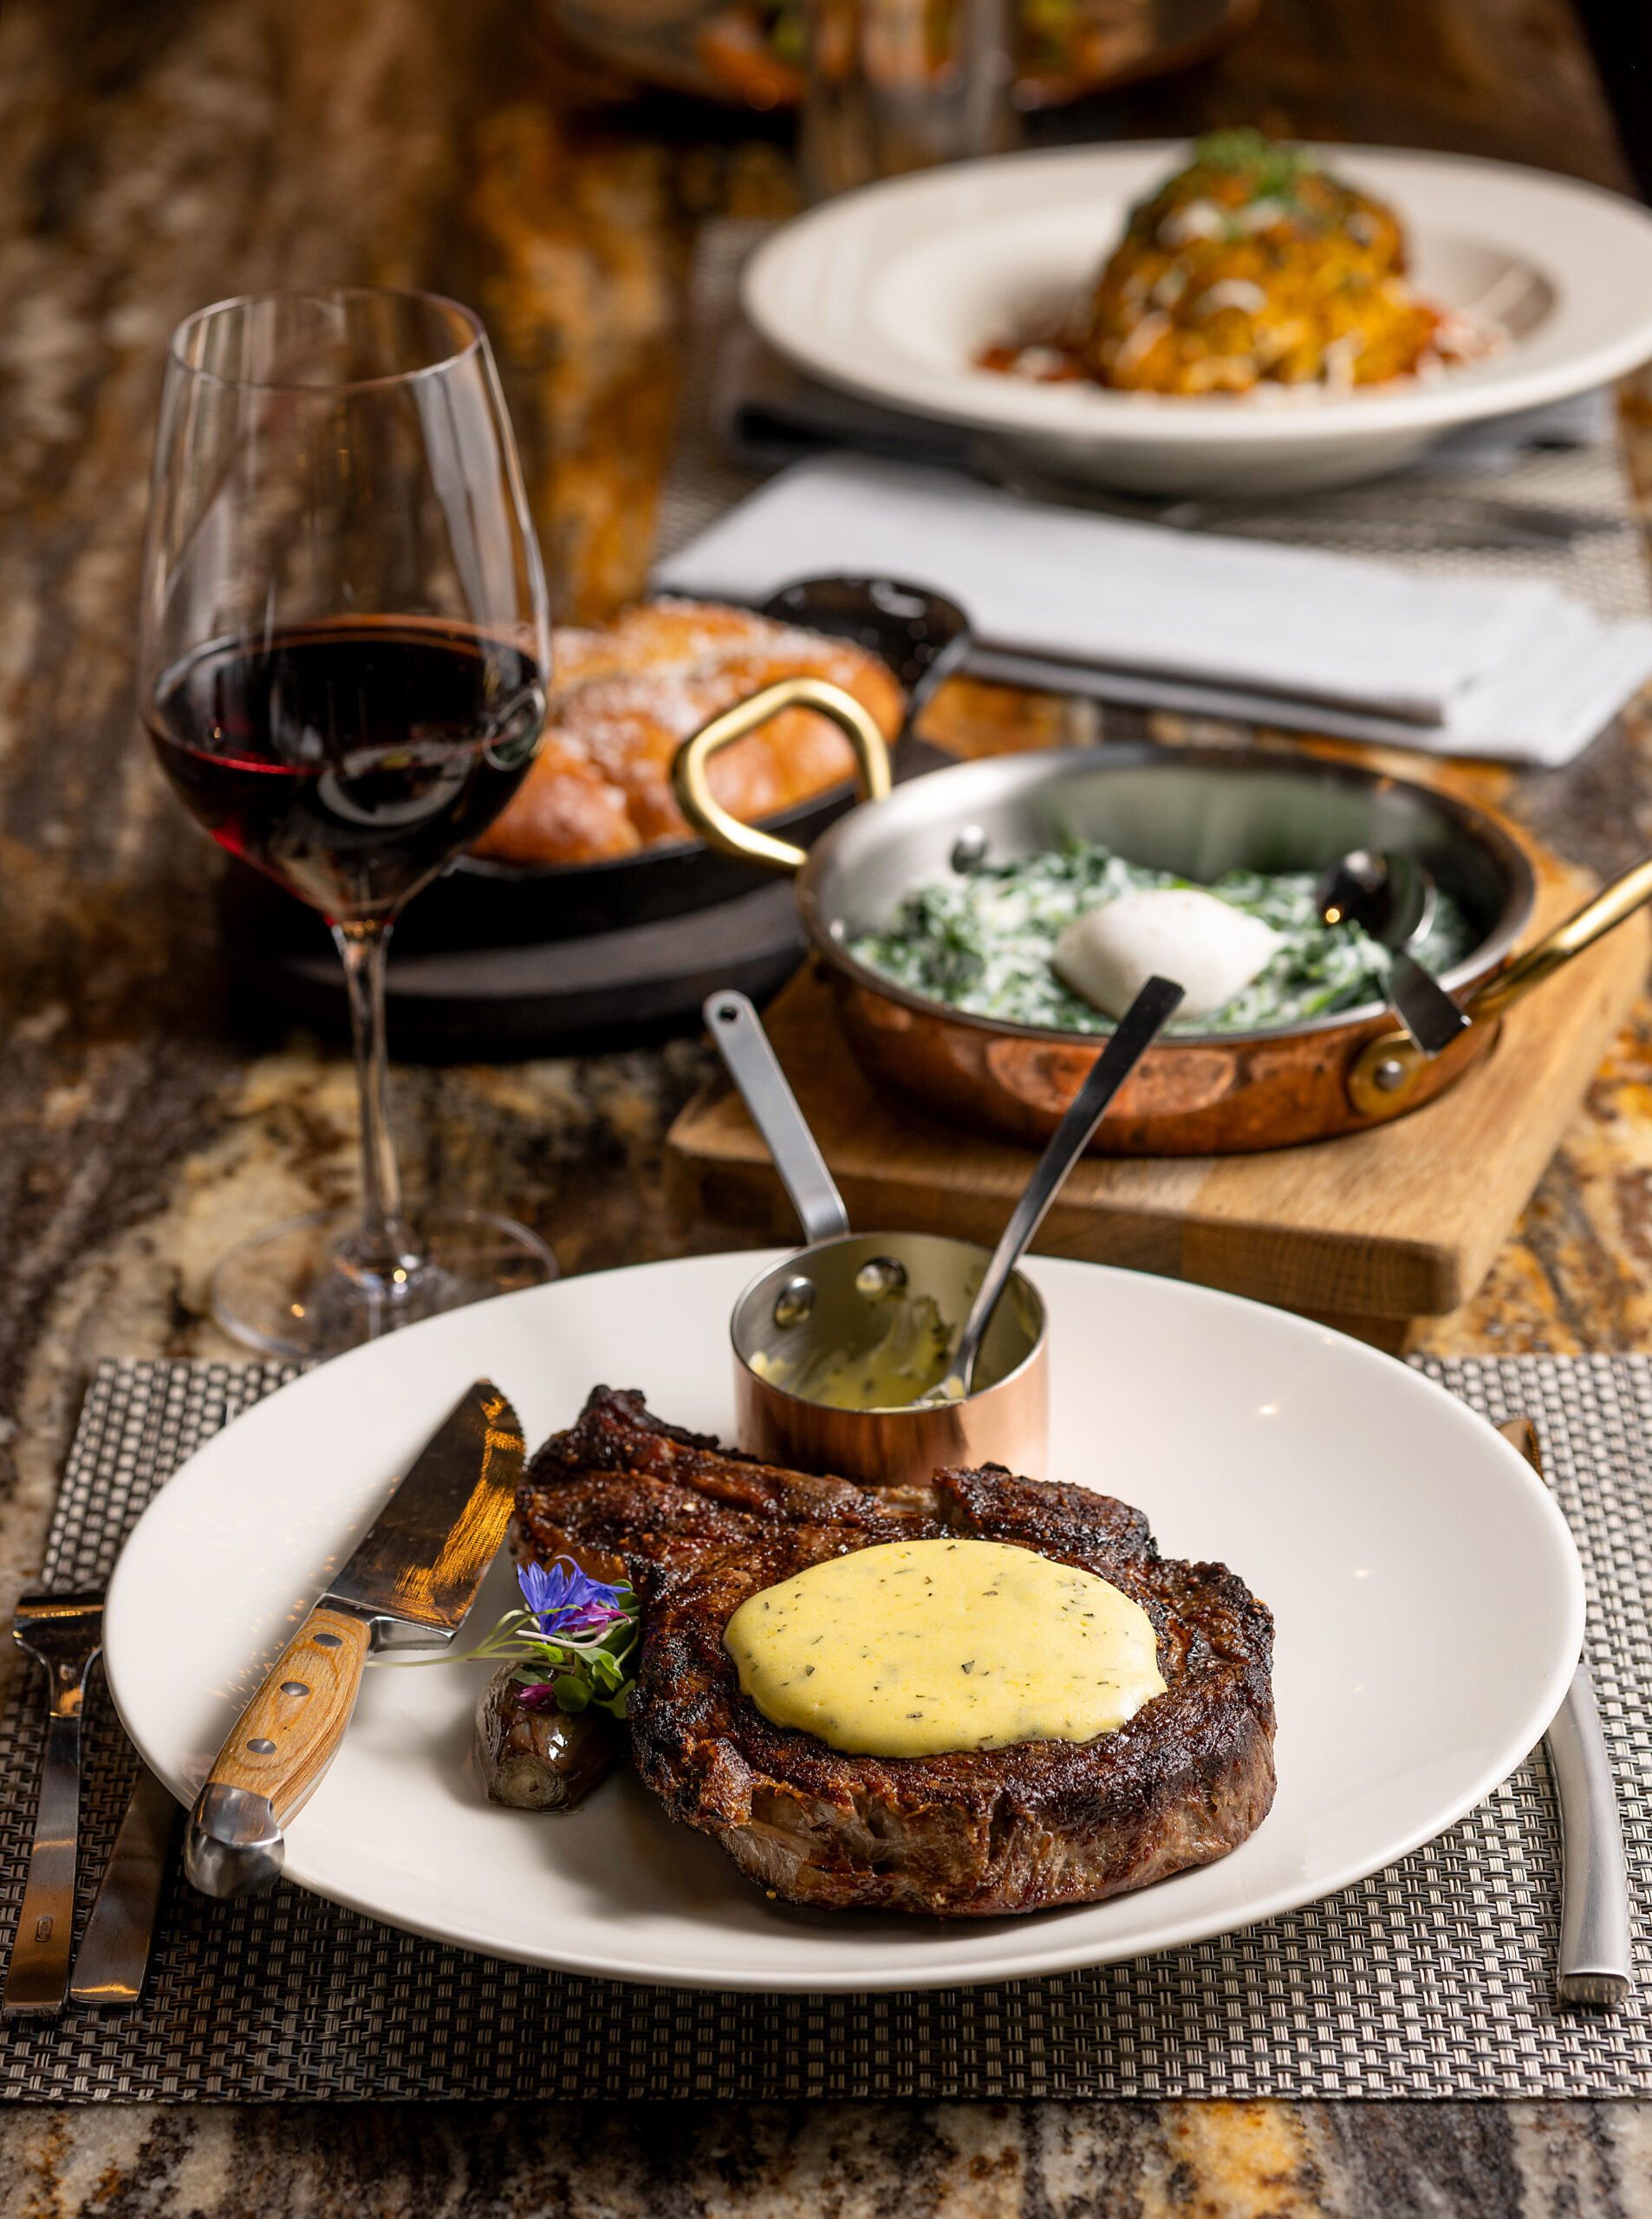 The 25 oz. Ribeye Steak with bernaise sauce, with a side of Creamed Spinach and Parker House Rolls from Goodnight’s Prime Steak + Spirits Friday, August 11, 2023 on the square in Healdsburg. (Photo John Burgess/The Press Democrat)